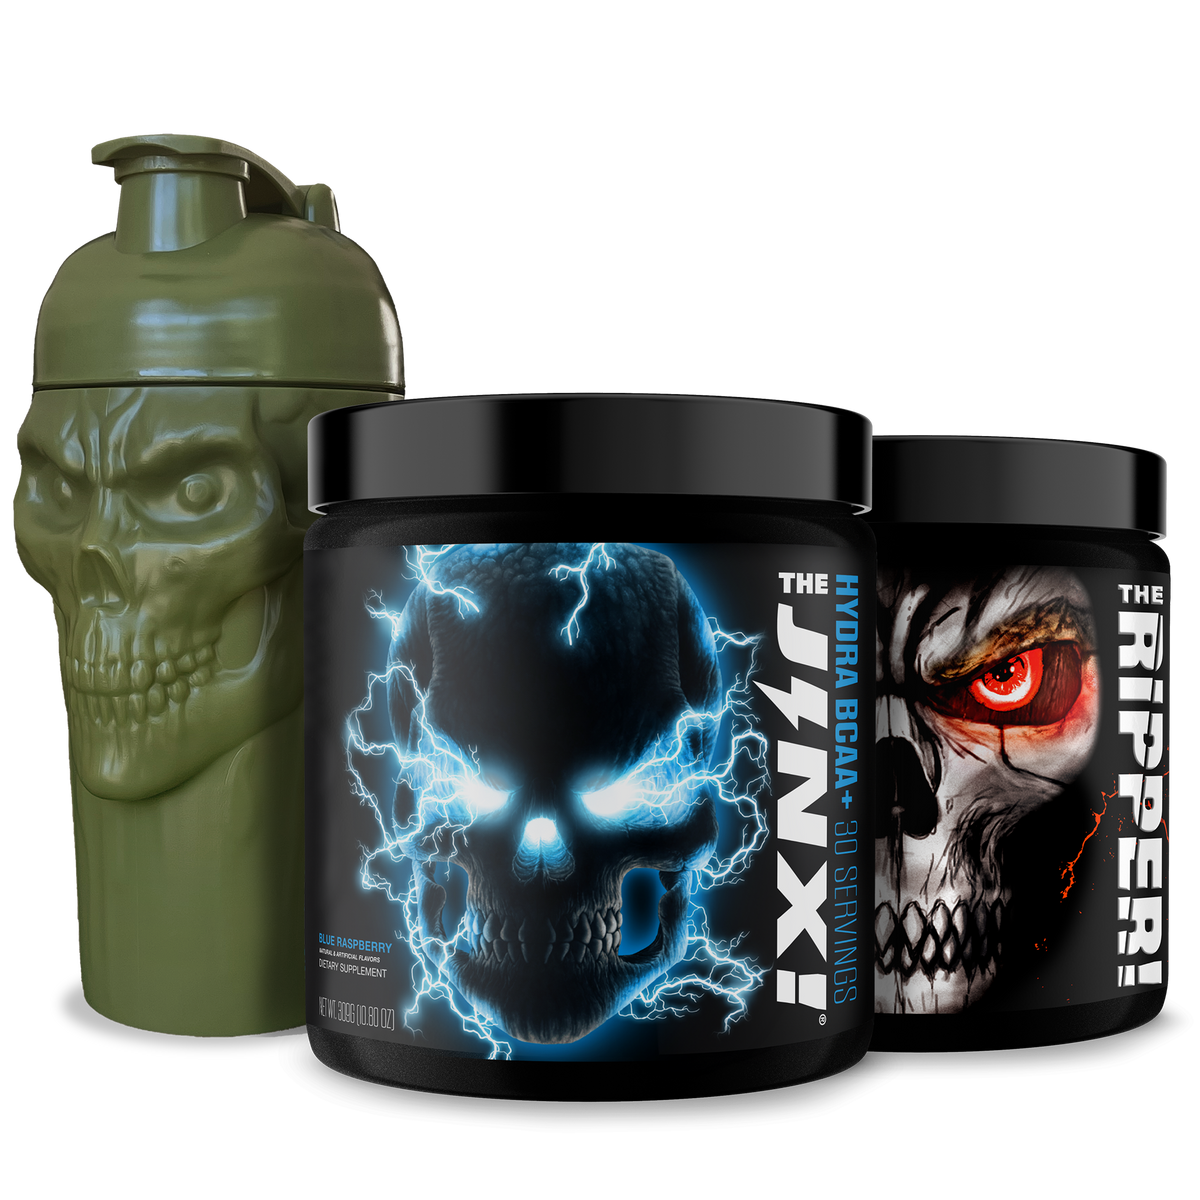 The Unleashed! Shred & Hydrate Bundle